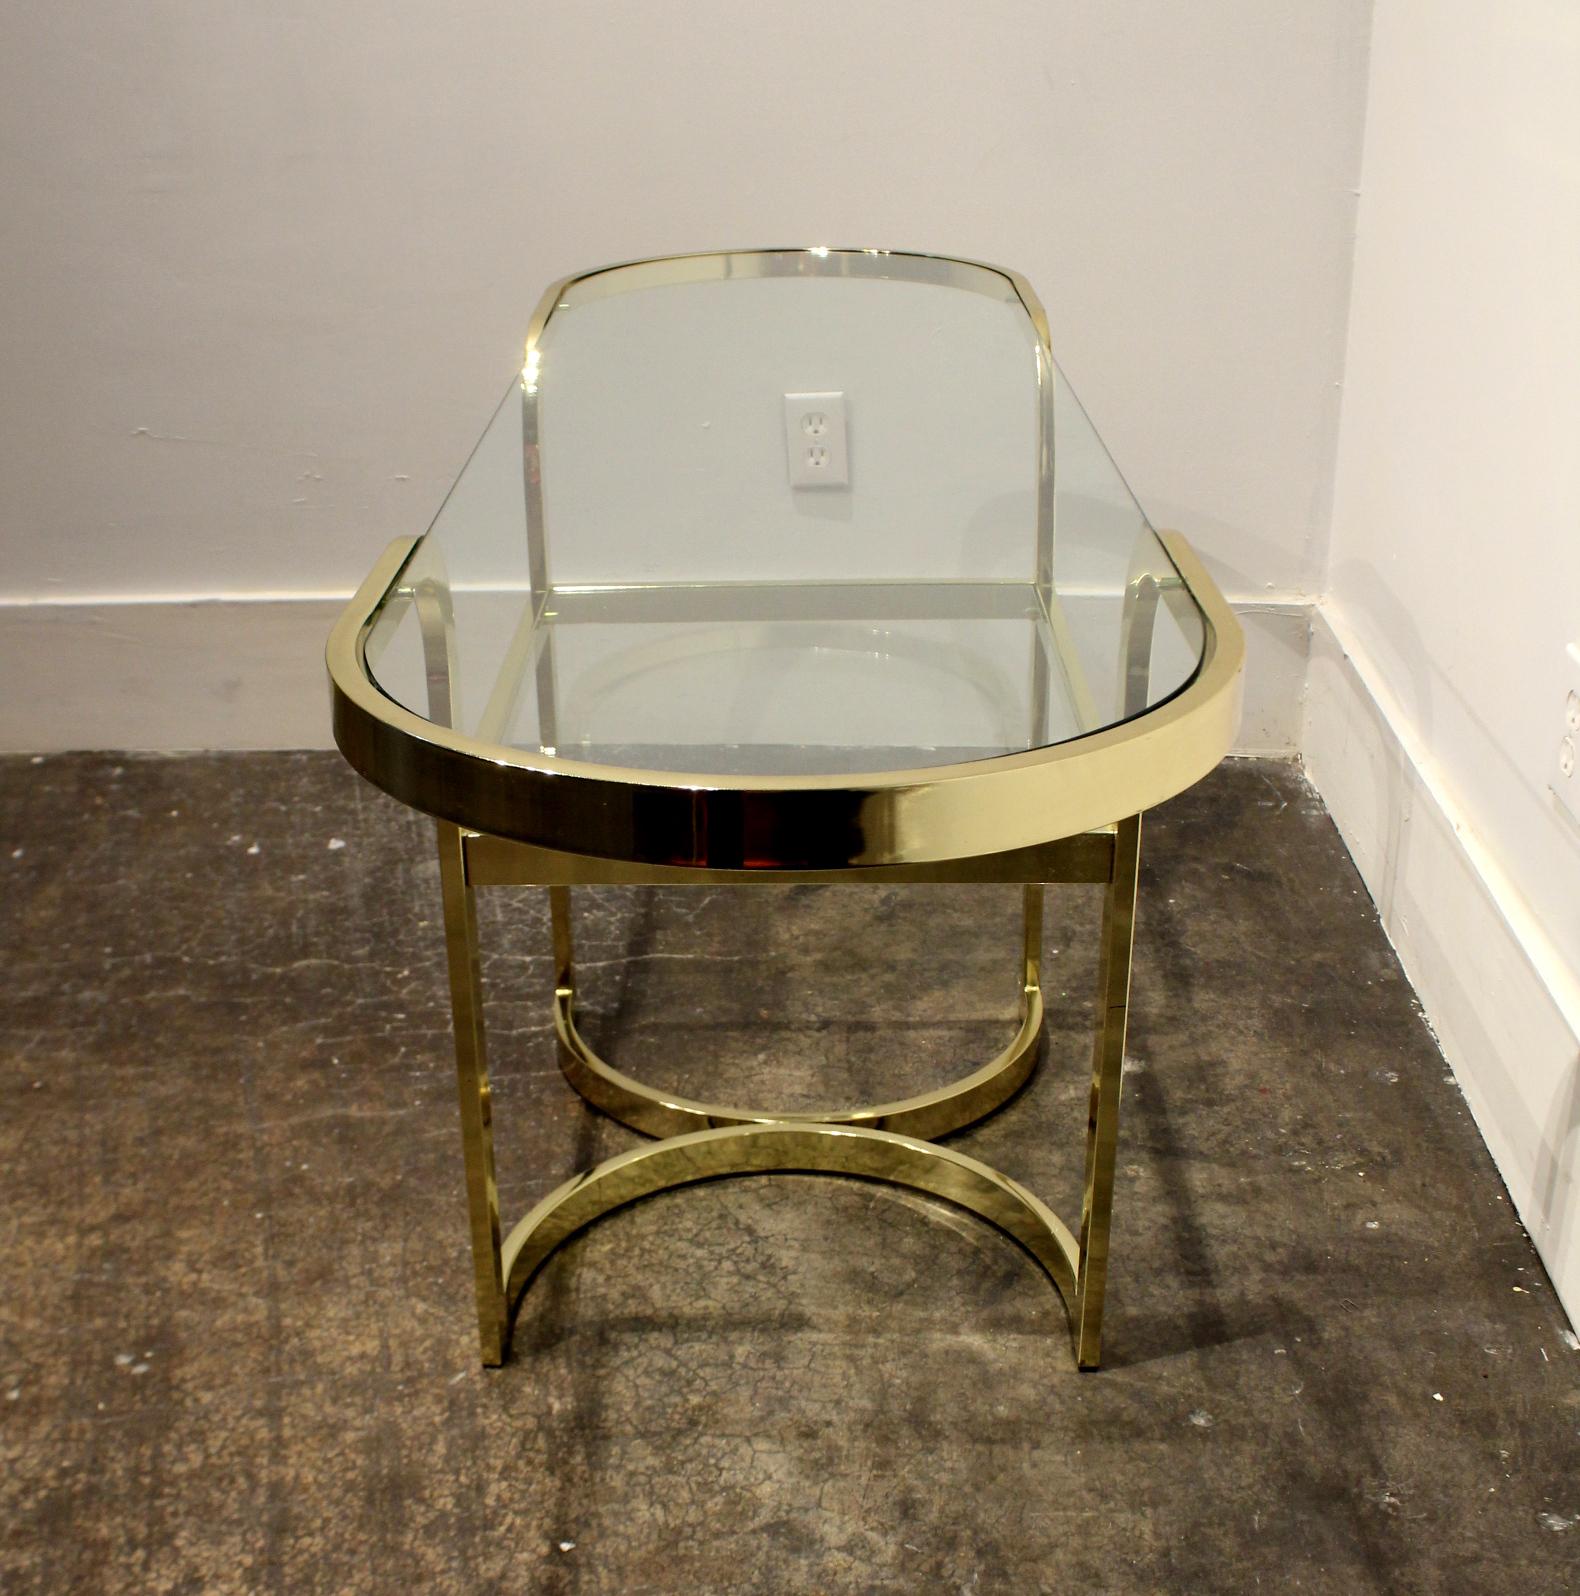 Brass Console Cafe Table with Pink Chairs by DIA Design Institute of America In Good Condition For Sale In Dallas, TX